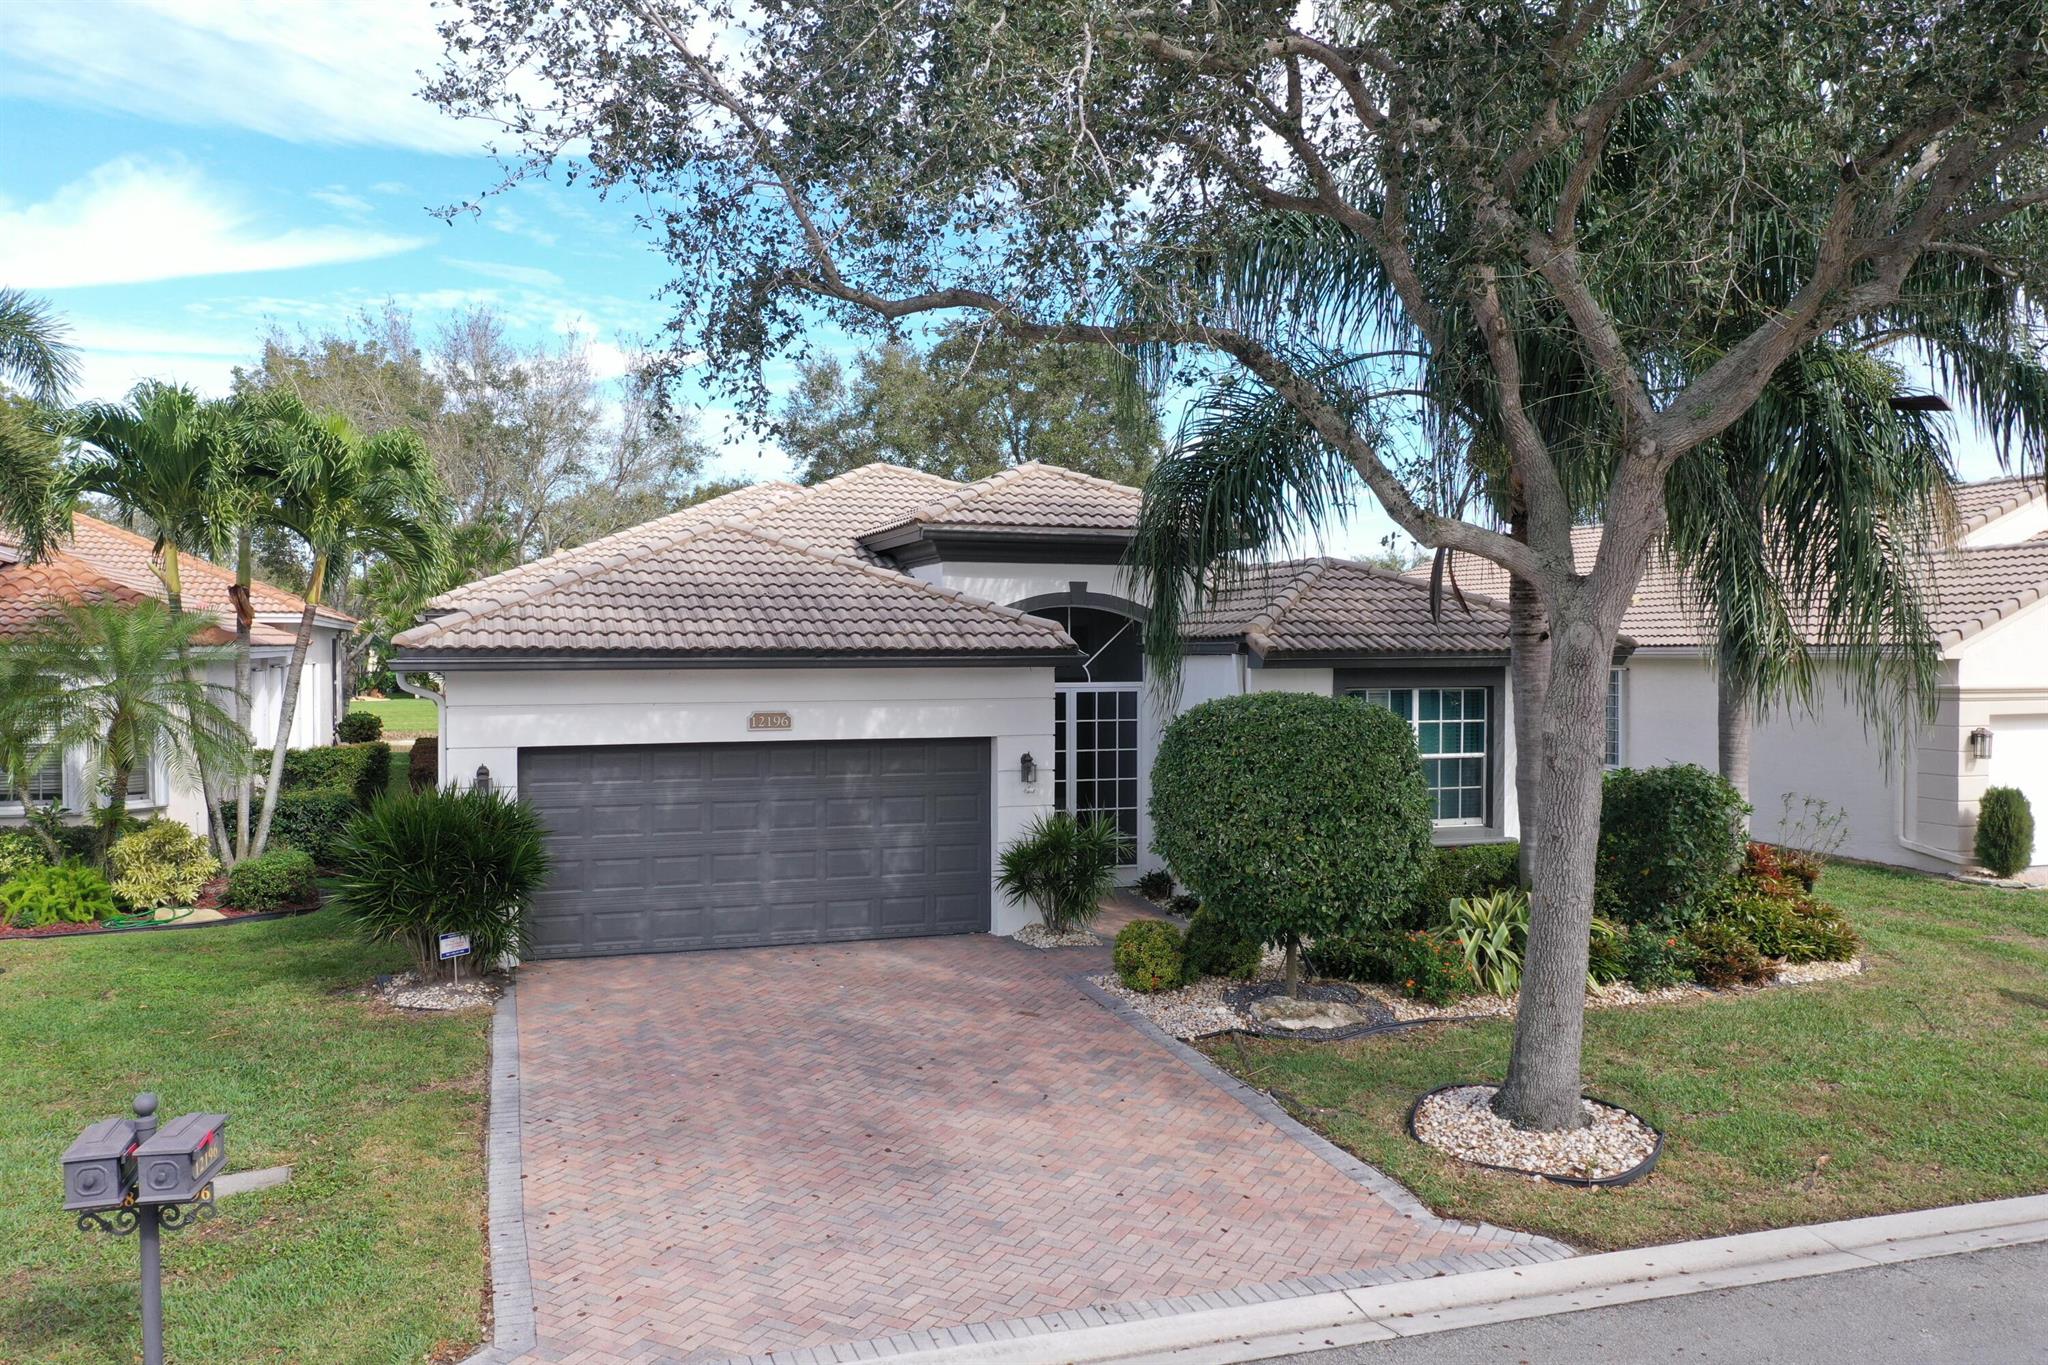 PRICED TO SELL, you do not want to miss this SPACIOUS DEVON II model LAKE VIEW home in West Boynton Beach's AVALON ESTATES. Enter the SCREEN-ENCLOSED, COVERED ENTRY and you will be greeted by 2,689 square feet of living space with 3 BEDROOMS + DEN and 2 1/2 BATHS. The moment you step into the FOYER with TRAY CEILING, you will know this home is very special. CERAMIC TILE on the DIAGONAL spans the living areas with BAMBOO WOOD FLOORING in the Bedrooms and Den. The CUSTOM KITCHEN features 42'' CHERRY WOOD CABINETS with PULL-OUT SHELVES, Siltstone QUARTZ COUNTERTOPS, STAINLESS-STEEL APPLIANCES, EXTRA LARGE PANTRY, LOTS of STORAGE and FOOD PREP SPACE. NEW REFRIGERTOR and DISHWASHER. YOUNGER AC (3-4 YEARS). The Master Bedroom Suite features a BAY WINDOW with REMOTE SHADES and DUAL CUSTOM-FITTED CLOSETS. The Master Bathroom has DUAL SINKS, ROMAN TUB, FRAMELESS ENCLOSED WALK-IN SHOWER, CUSTOM WOOD VANITIES, and SEPARATE WC. The SPLIT FLOOR PLAN provides privacy for you and your guests. The COVERED, SCREENED PATIO has NEW TILE FLOORING, TWO CEILING FANS and a FABULOUS LAKE VIEW. A pocket door leads to the separate LAUNDRY ROOM with BRAND NEW WASHING MACHINE, CABINETS, WORKSPACE and UTILITY SINK. WATER SOFTENER. This home is perfect for entertaining and enjoying the South Florida lifestyle. Note: excludes Master Bedroom television and chandelier over Dining Room table. 

Discerning buyers place AVALON ESTATES at the TOP OF THEIR LIST! The community offers care-free, resort-style living at its very best! CABLE AND HIGH-SPEED INTERNET is INCLUDED in the HOA FEES. There is a Fitness Center, Aerobics Room and Saunas, Arts &amp; Crafts Studio, Library, Billiards Room, Card Rooms, and Performance Theater.  The Community Director is on site weekdays. There is also a Social Director on site from Monday to Thursday. The Sports Center features 6 Har-Tru Tennis Courts, 2 Pickleball Courts, 2 Bocce Courts, Shuffleboard, a Putting Green, Driving Net and more. There is even a tot lot for visiting grandchildren. In addition, there are Movie Nights, Entertainment, Weekly Craft Classes, a full array of Clubs and More! You can be as active as you like and never be bored. Easy access to the Publix Shopping Plaza. Just a short drive to the Delray Marketplace, Canyon Town Center, and Cobblestone Commons.